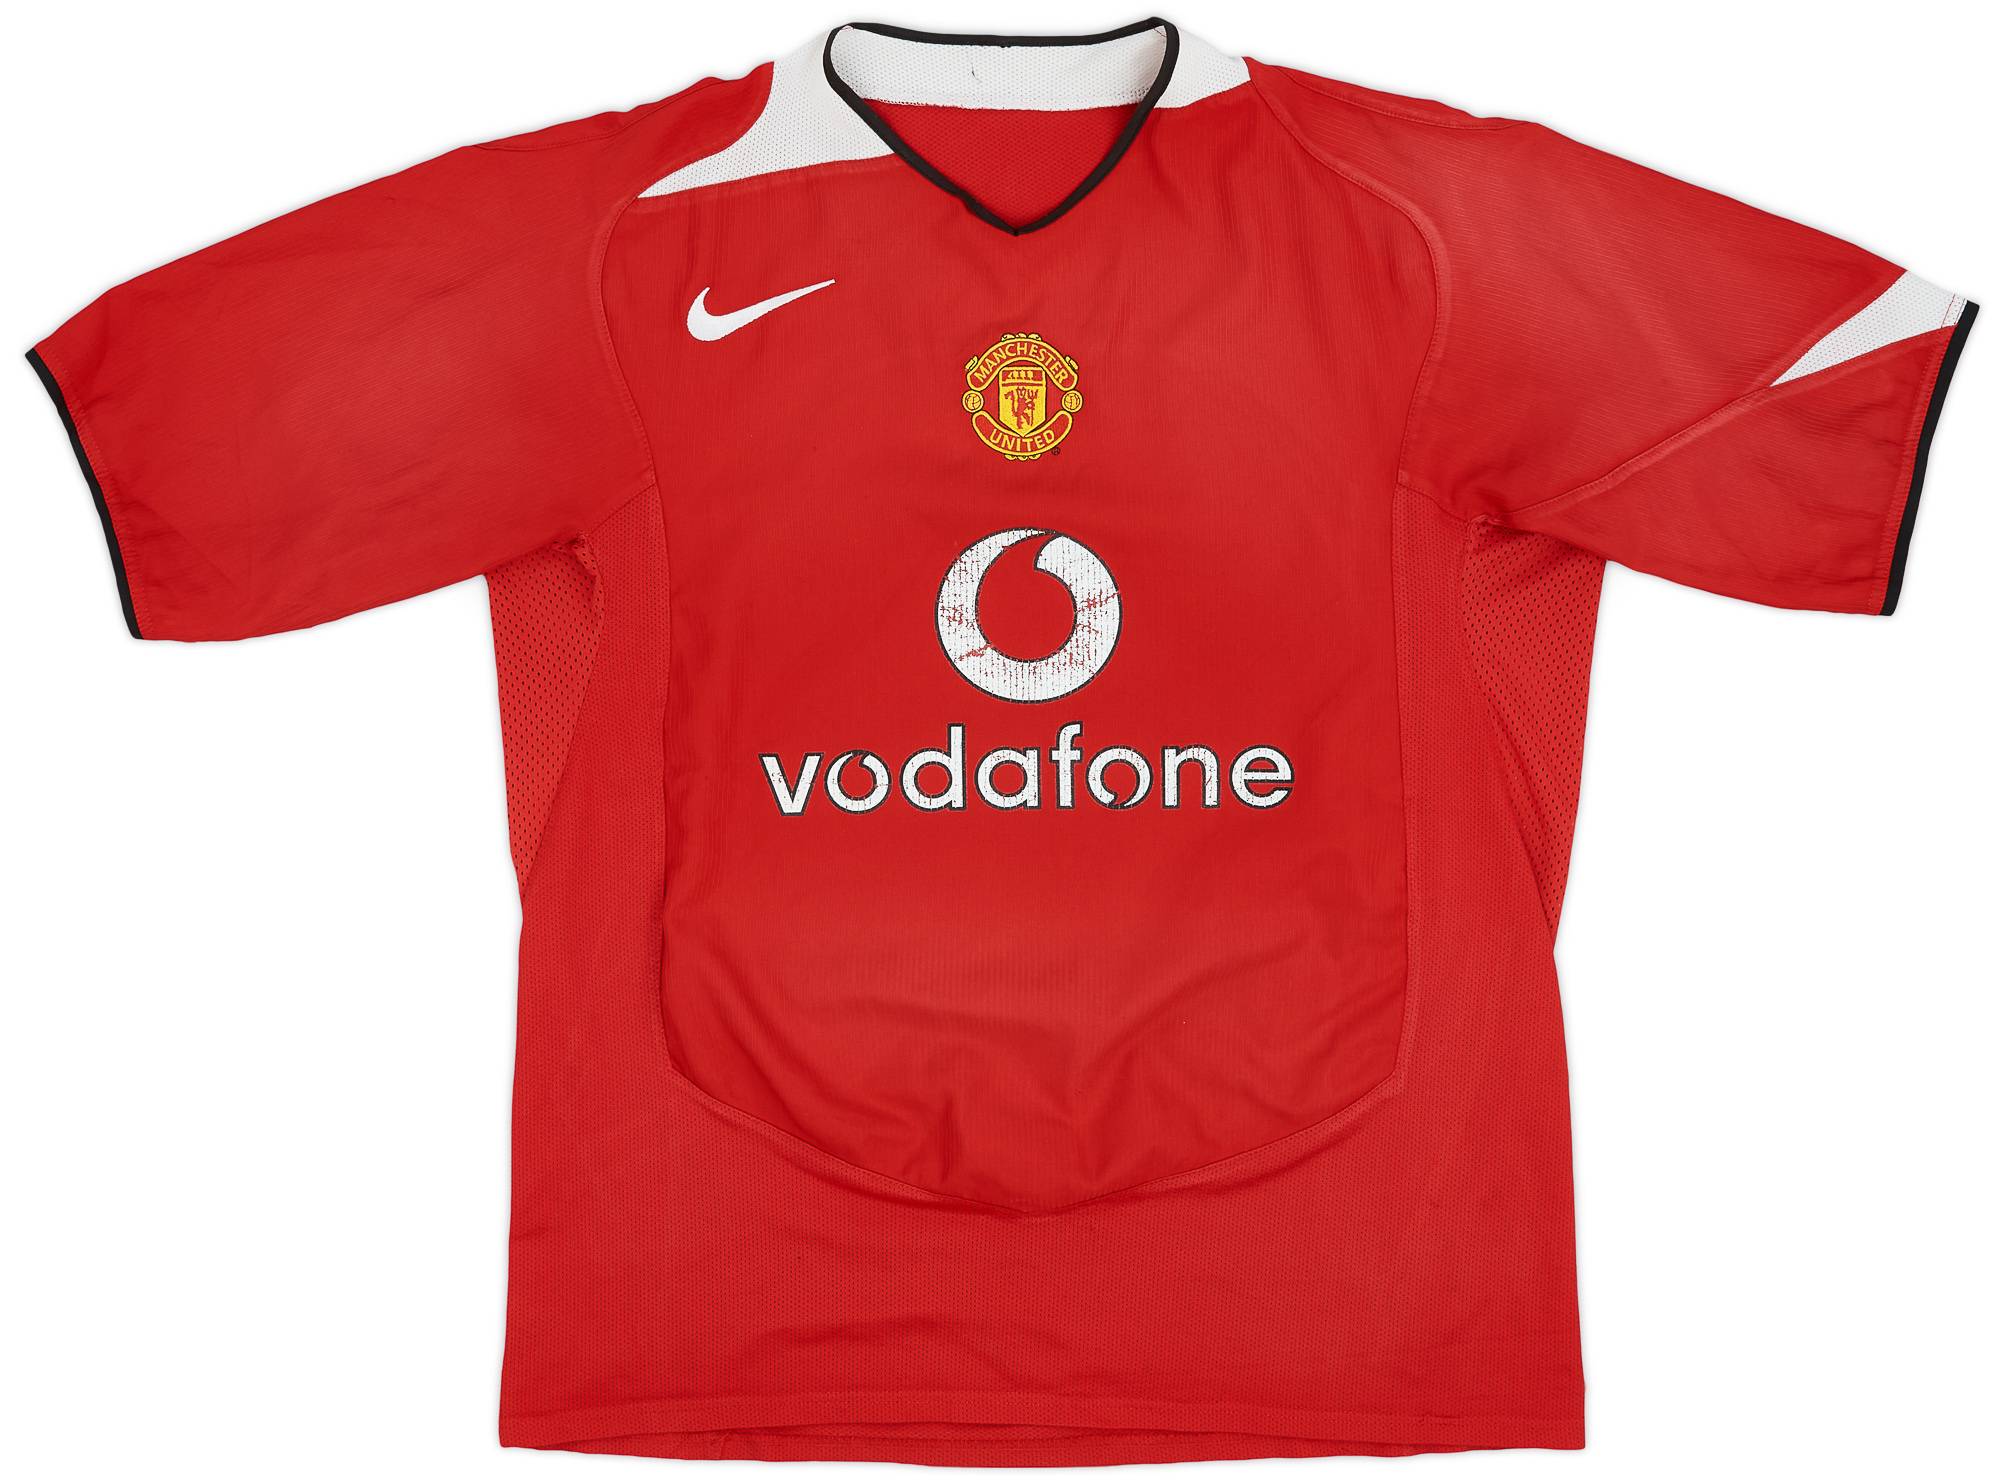 2004-06 Manchester United Home Shirt - 5/10 - (L)